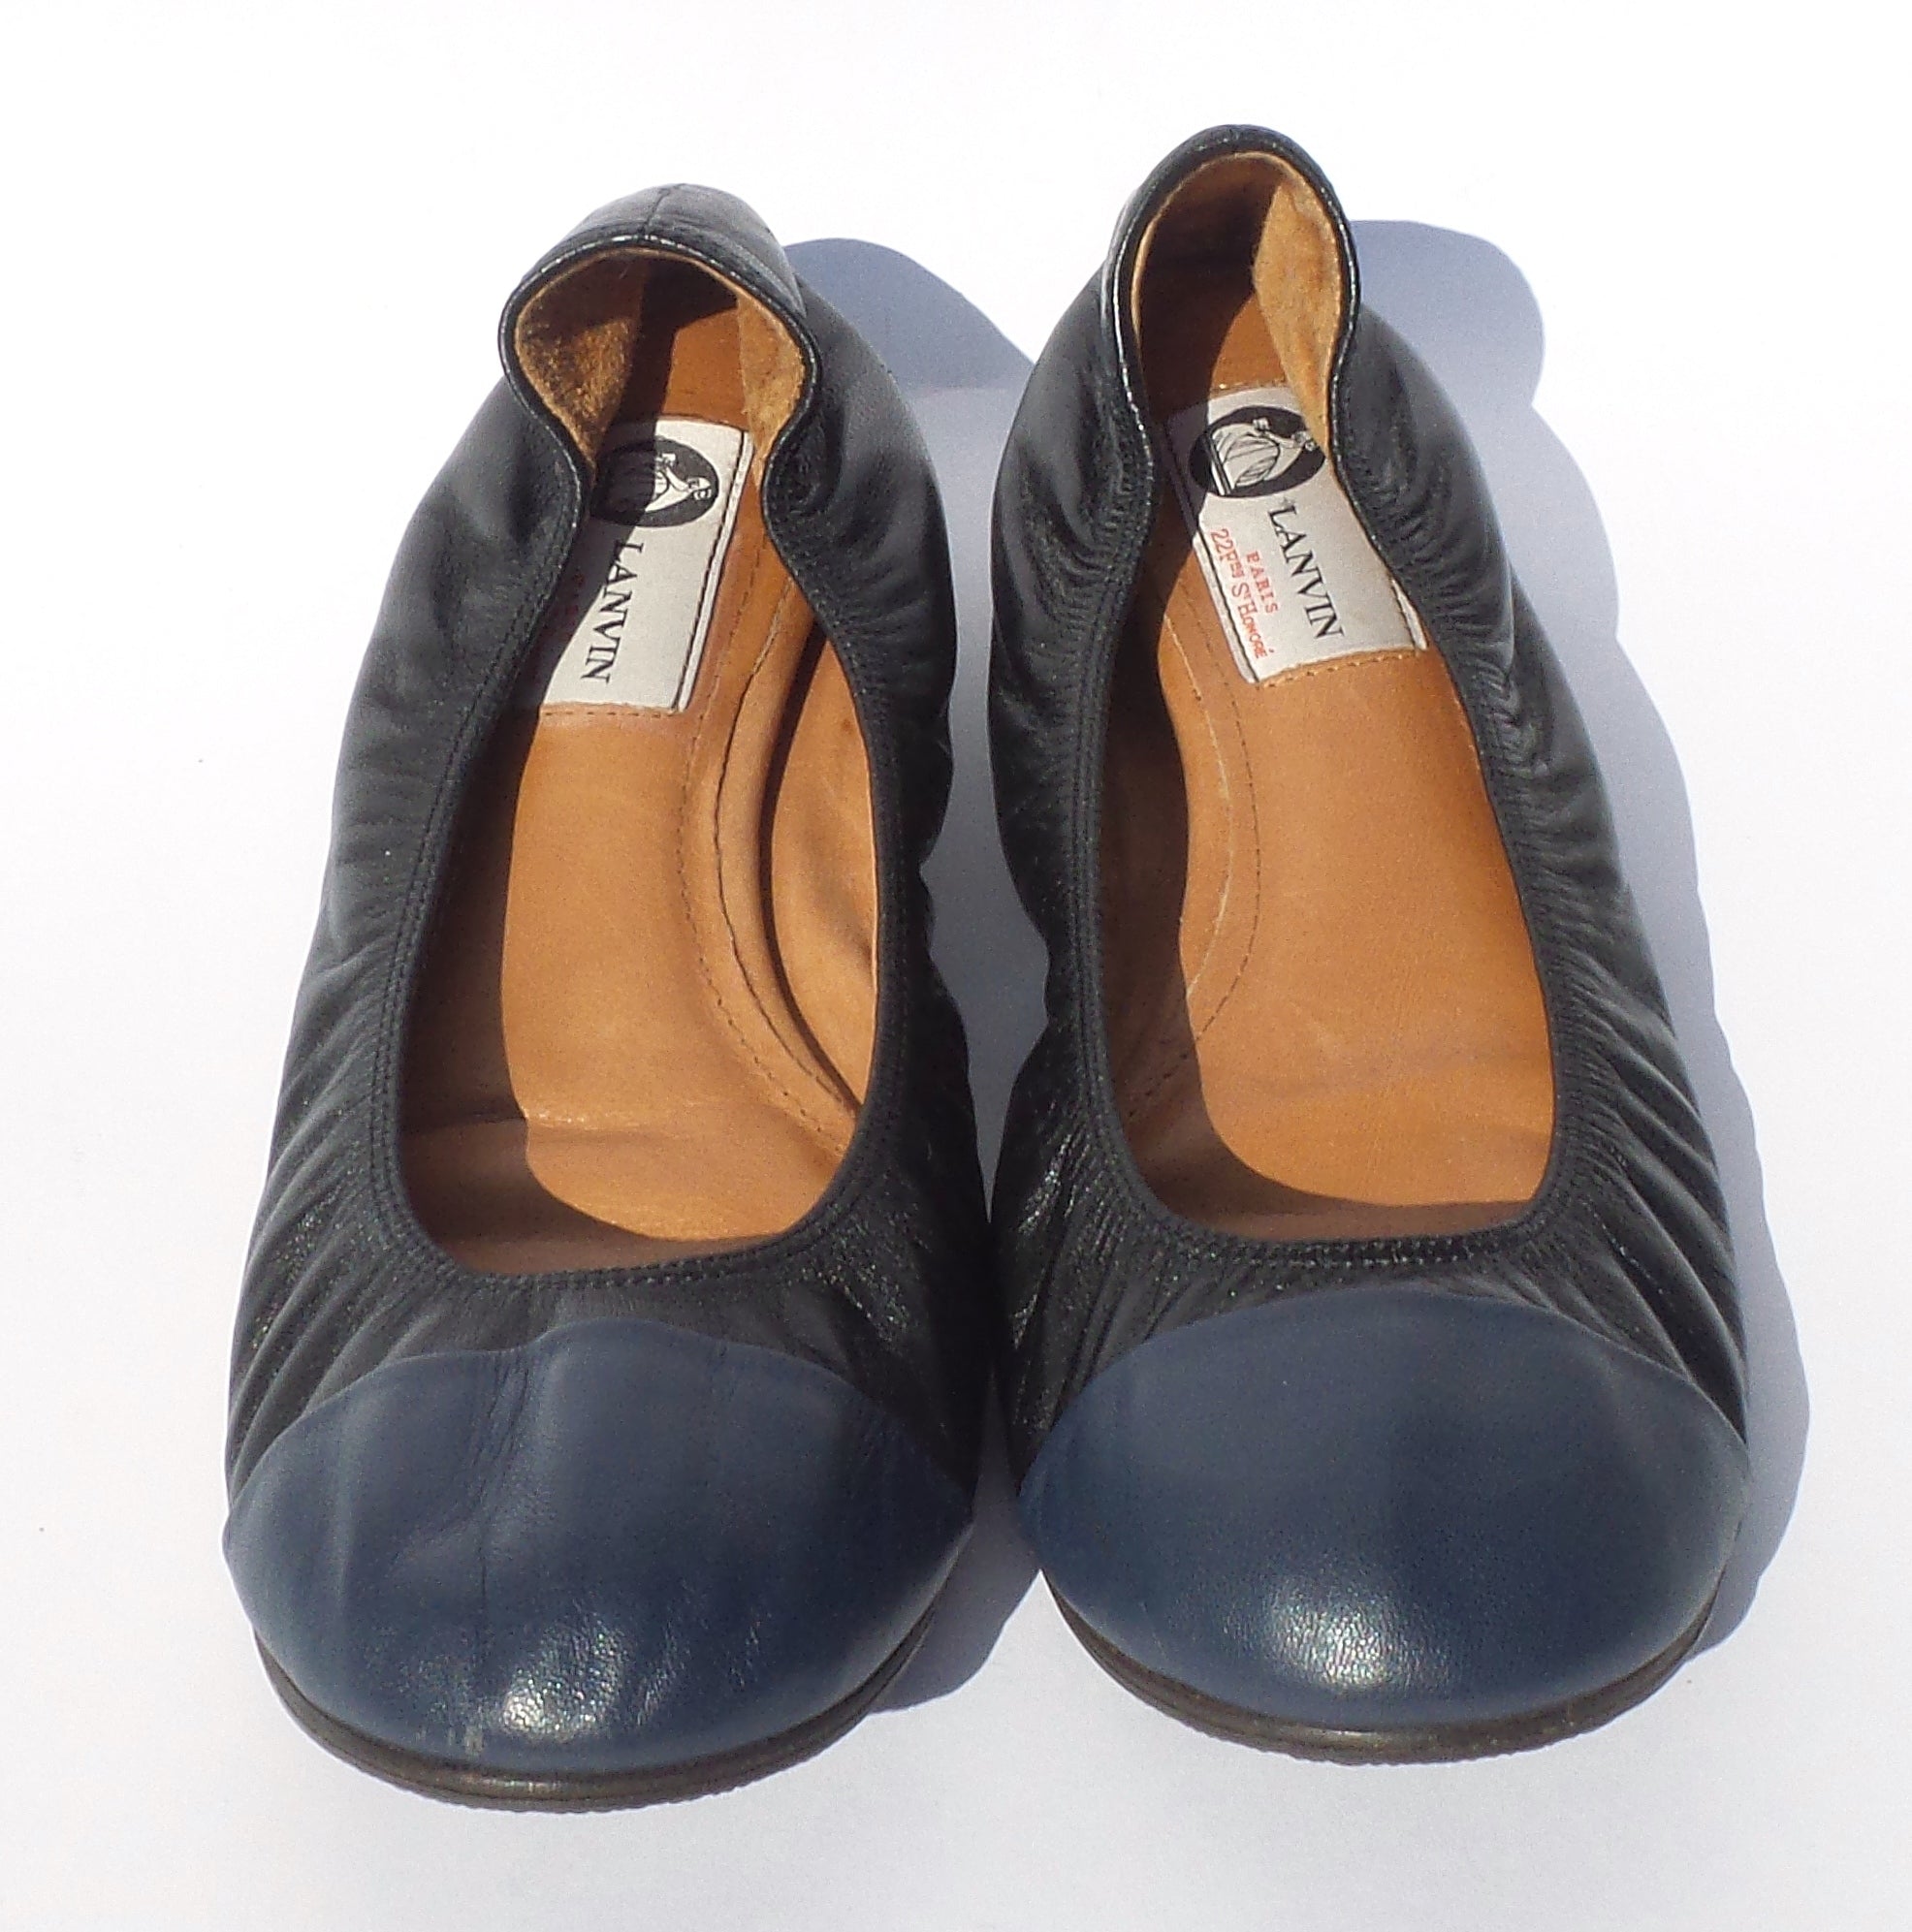 leather navy flats